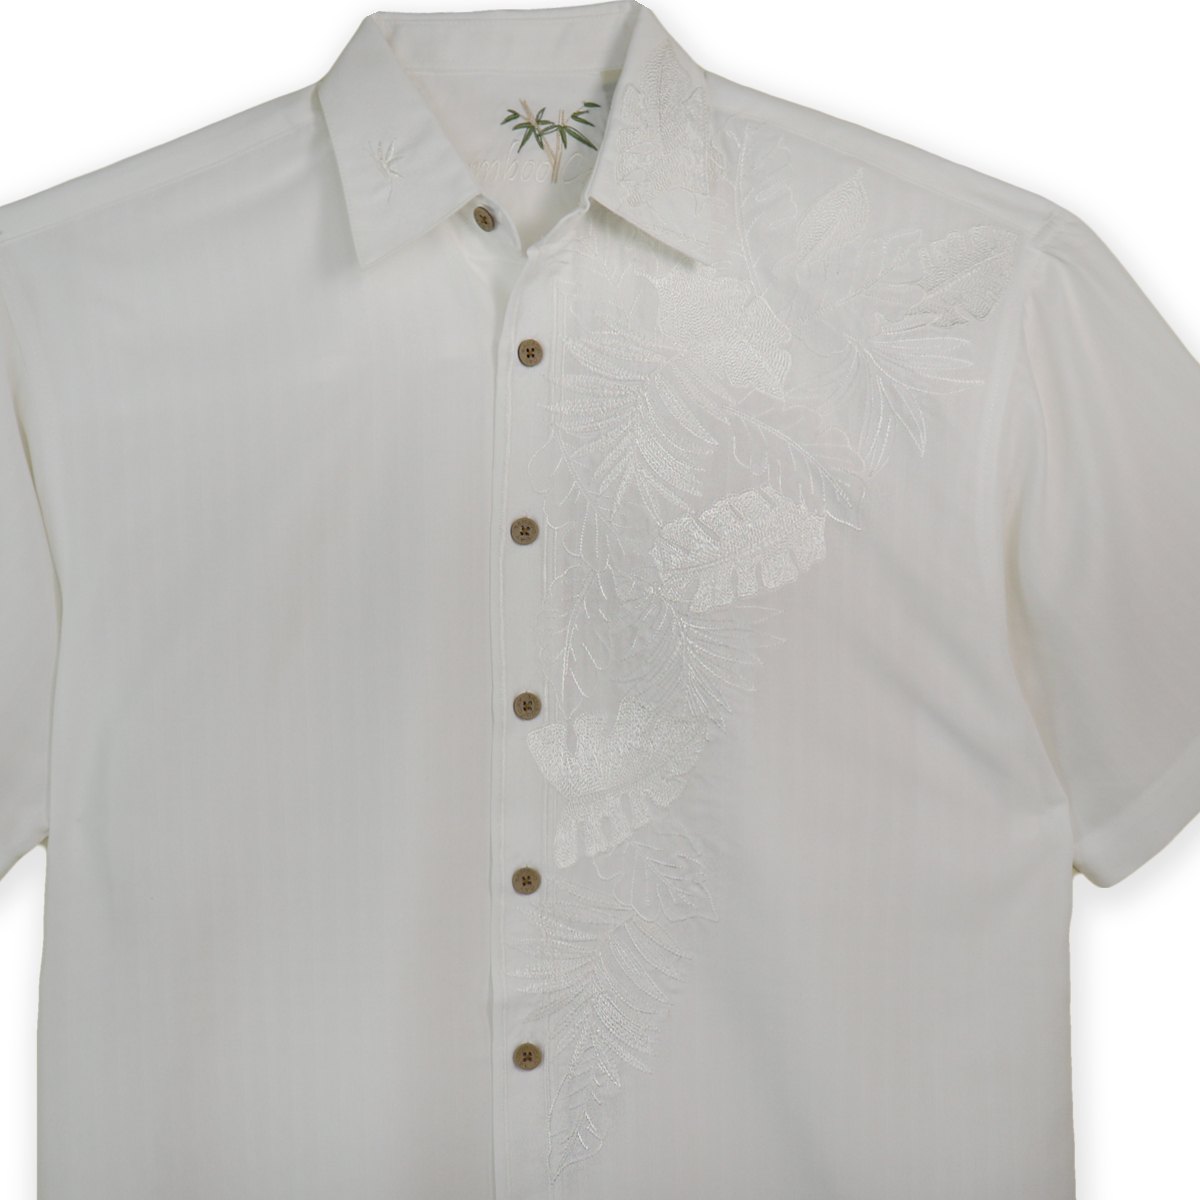 Bamboo Cay Men’s Shirt – Moonlight fronds – white – front close up